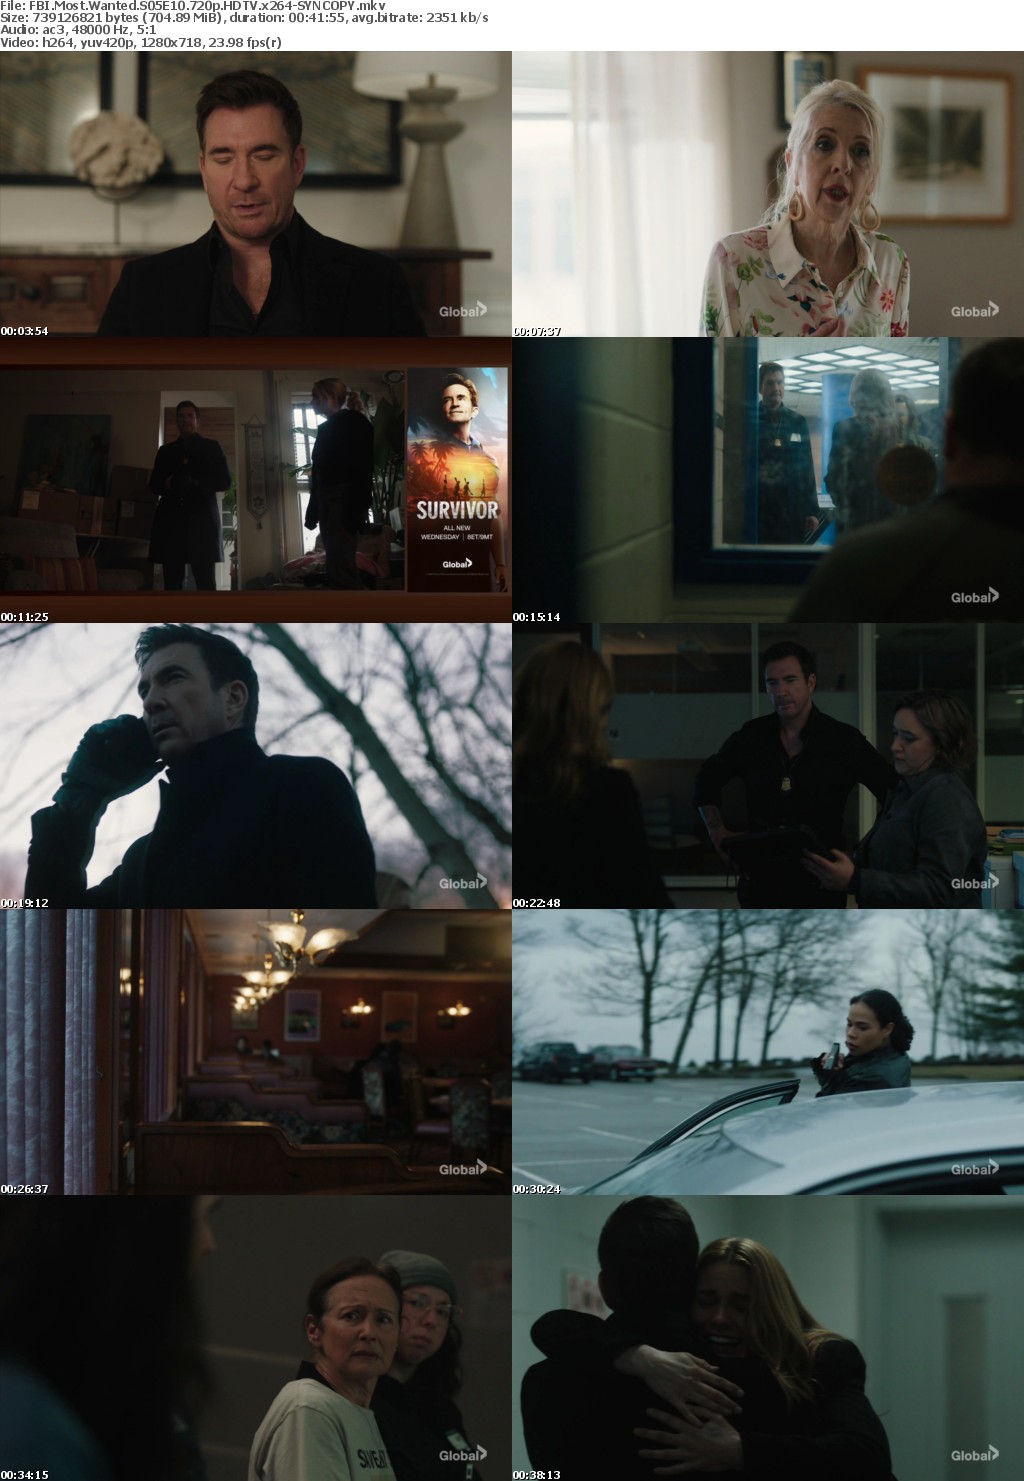 FBI Most Wanted S05E10 720p HDTV x264-SYNCOPY